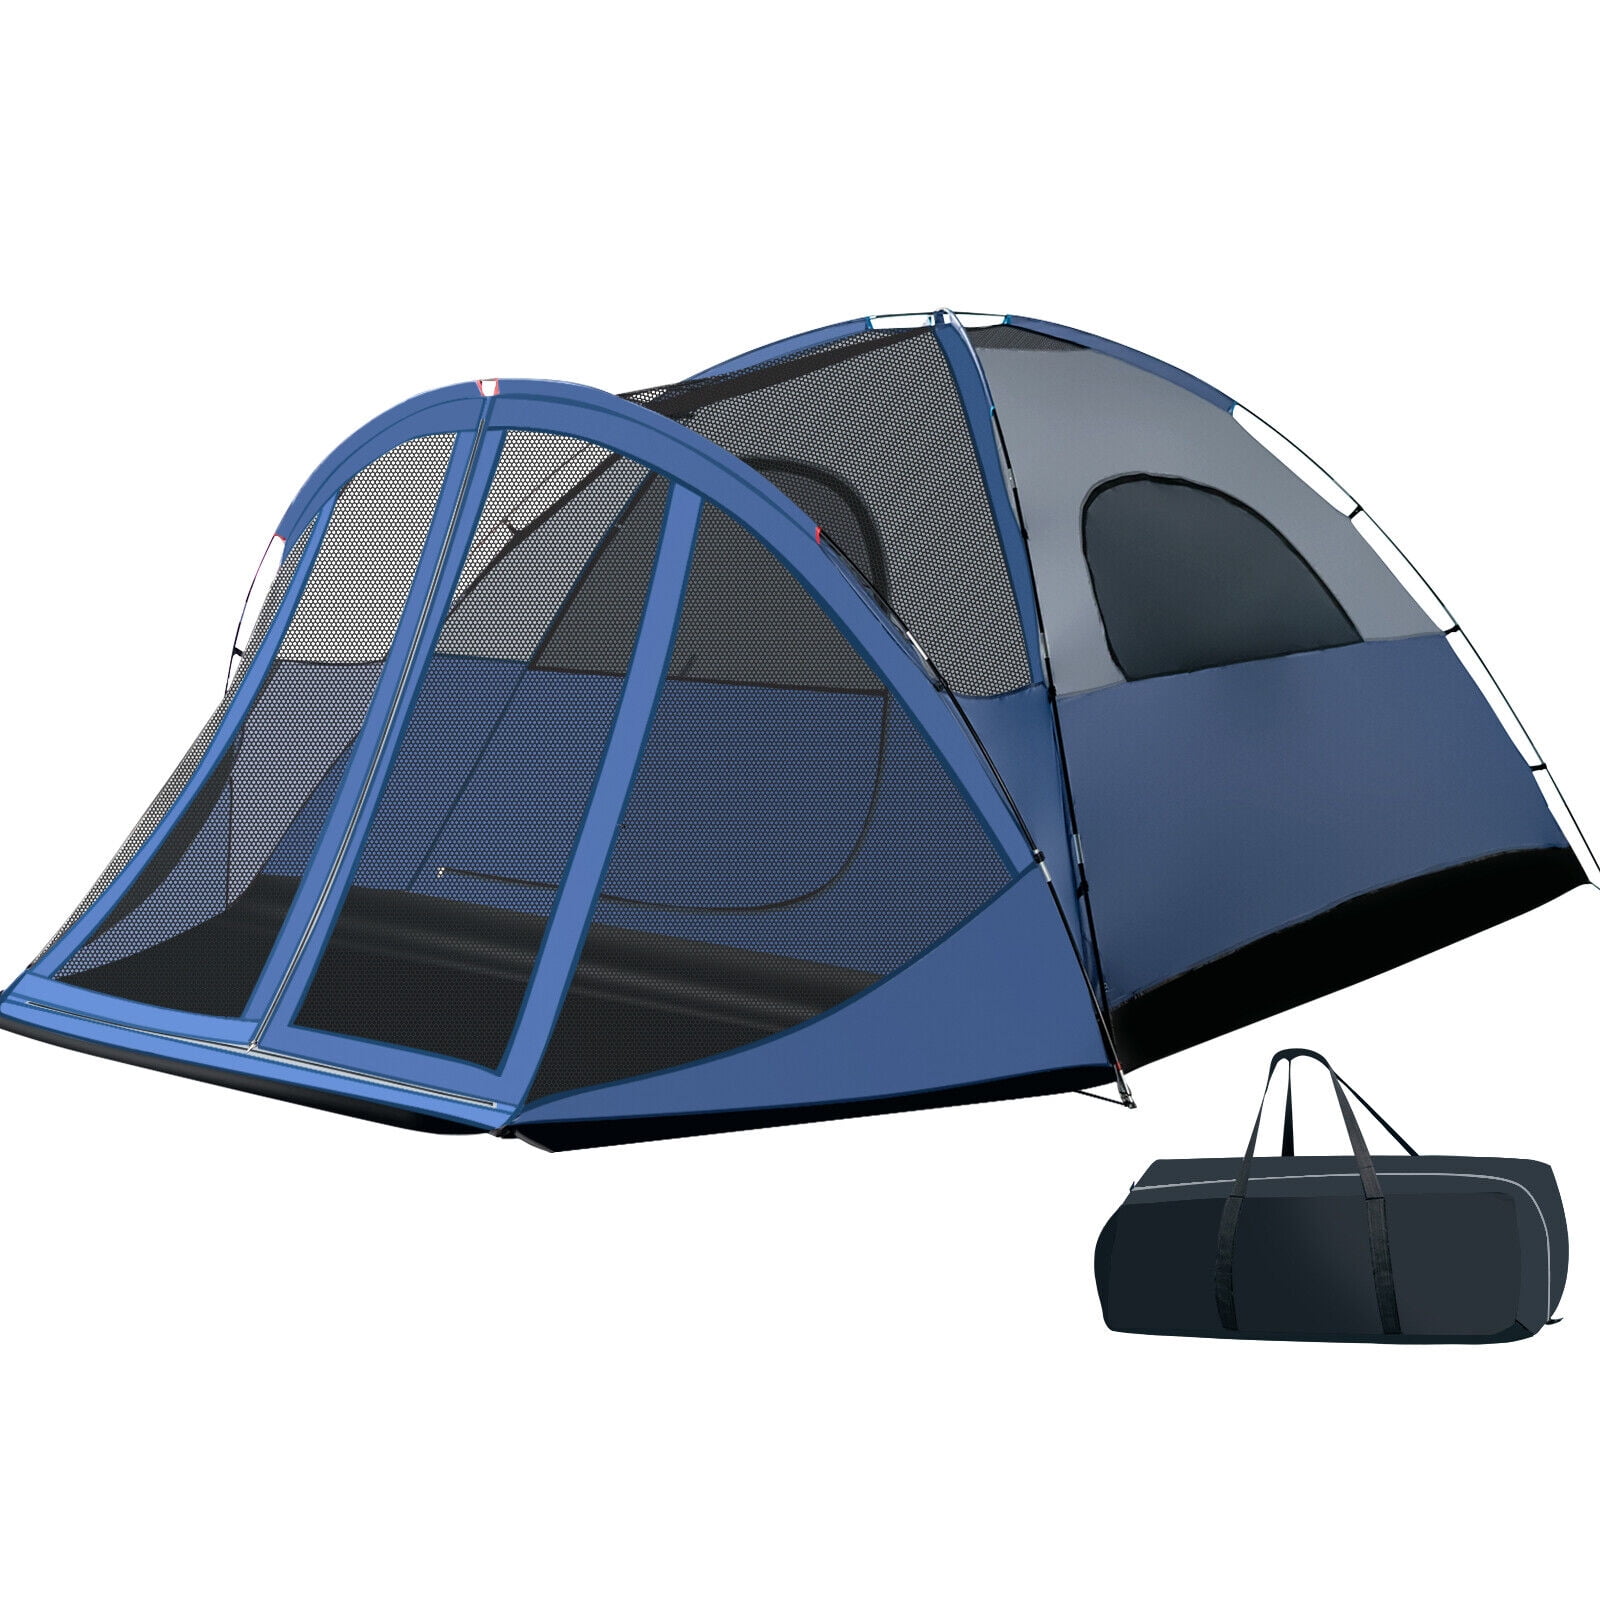 ALPHA CAMP 6 Person Dome Family Camping Tent 14' x 10' – maisonartsus